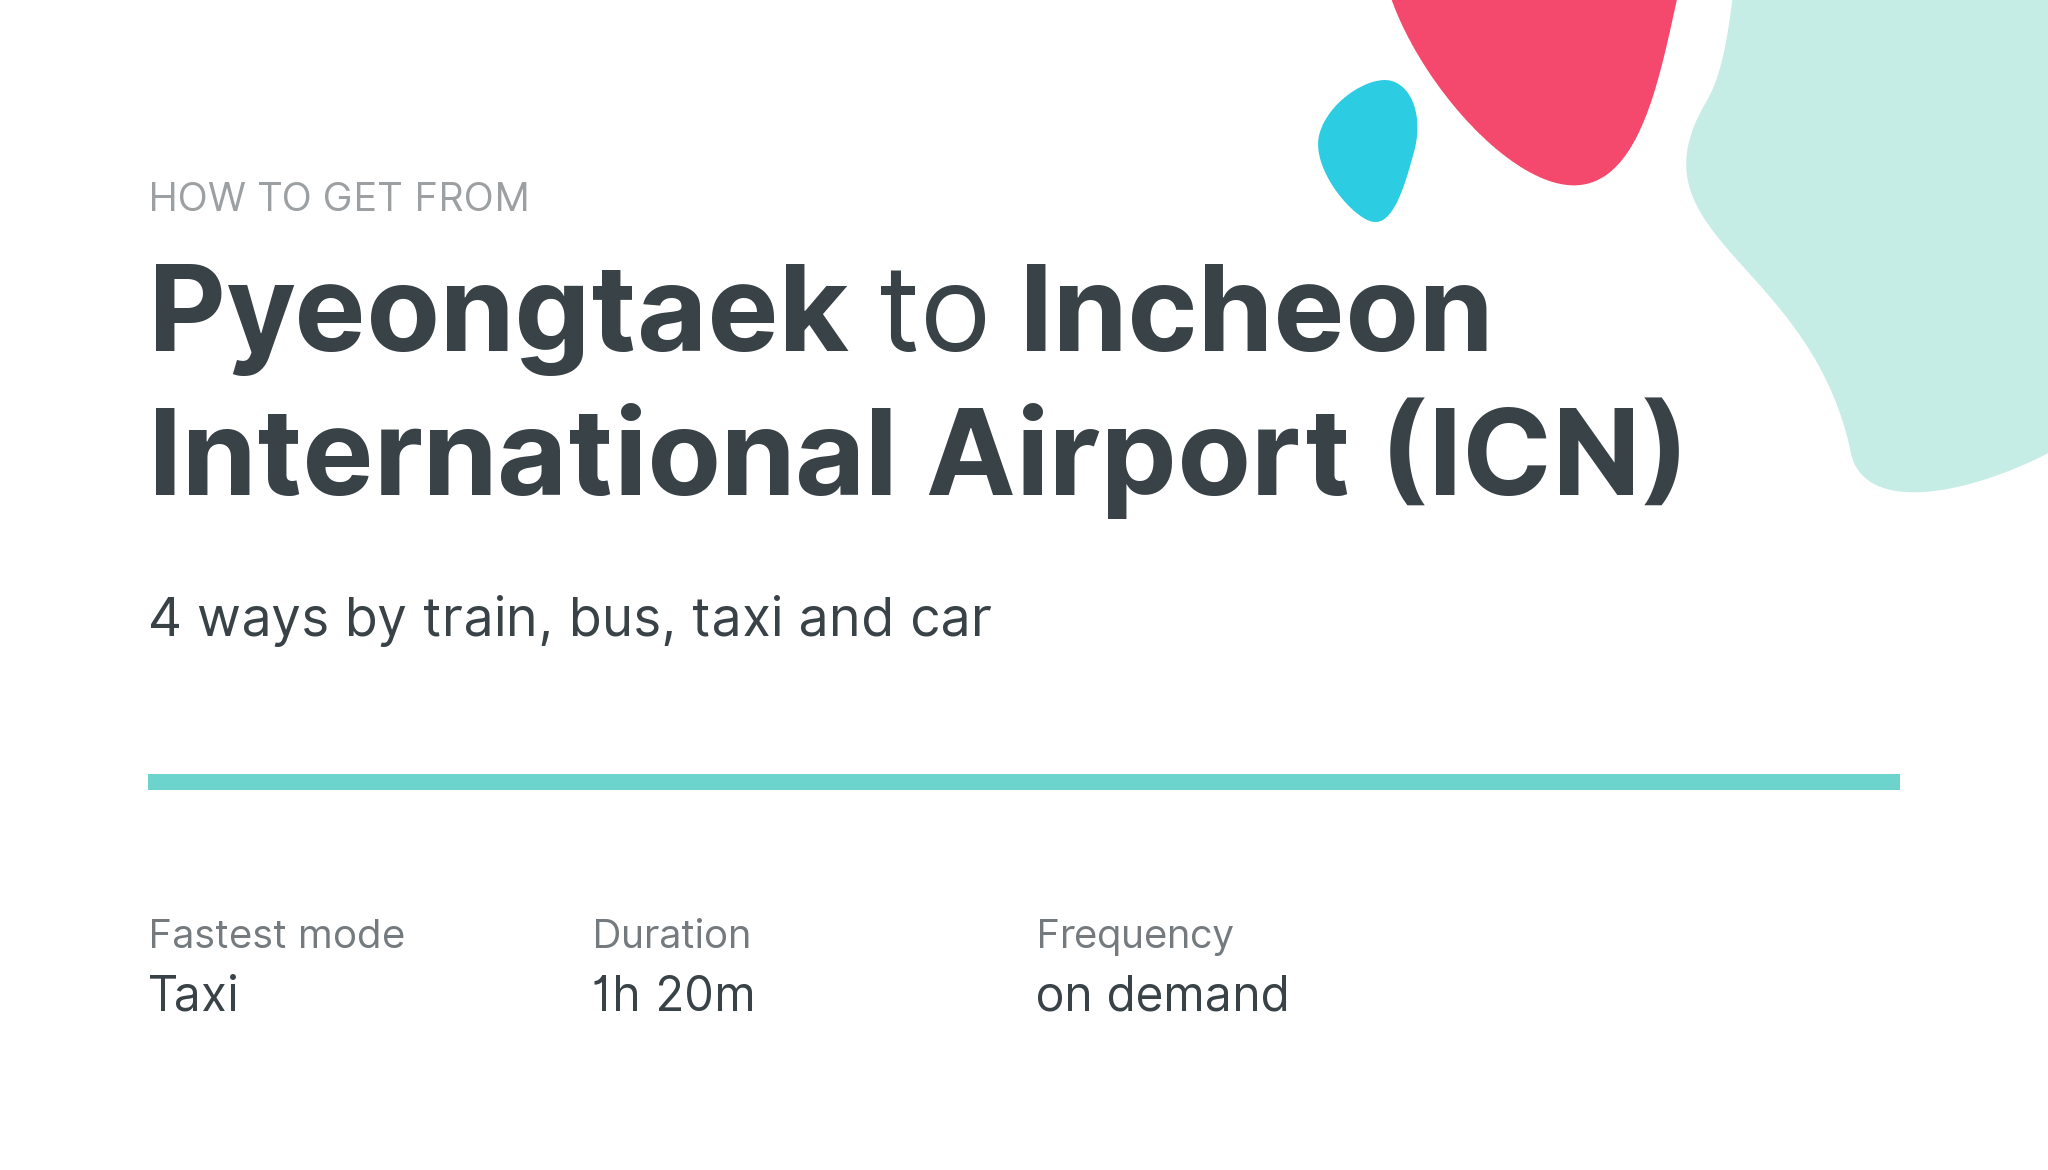 How do I get from Pyeongtaek to Incheon International Airport (ICN)